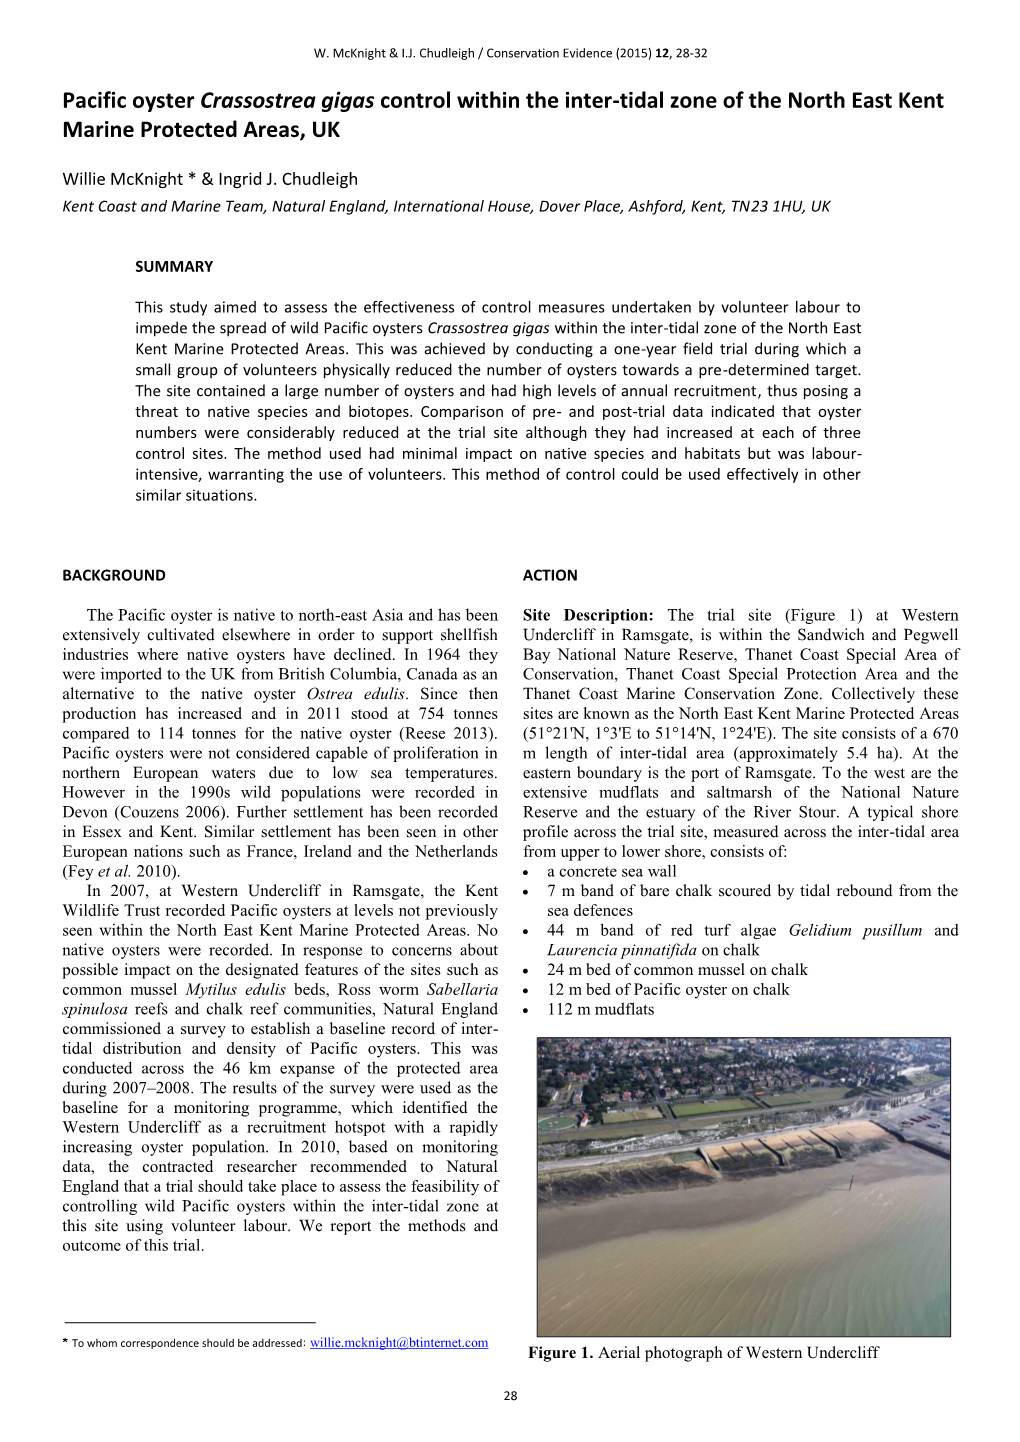 Pacific Oyster Crassostrea Gigas Control Within the Inter-Tidal Zone of the North East Kent Marine Protected Areas, UK